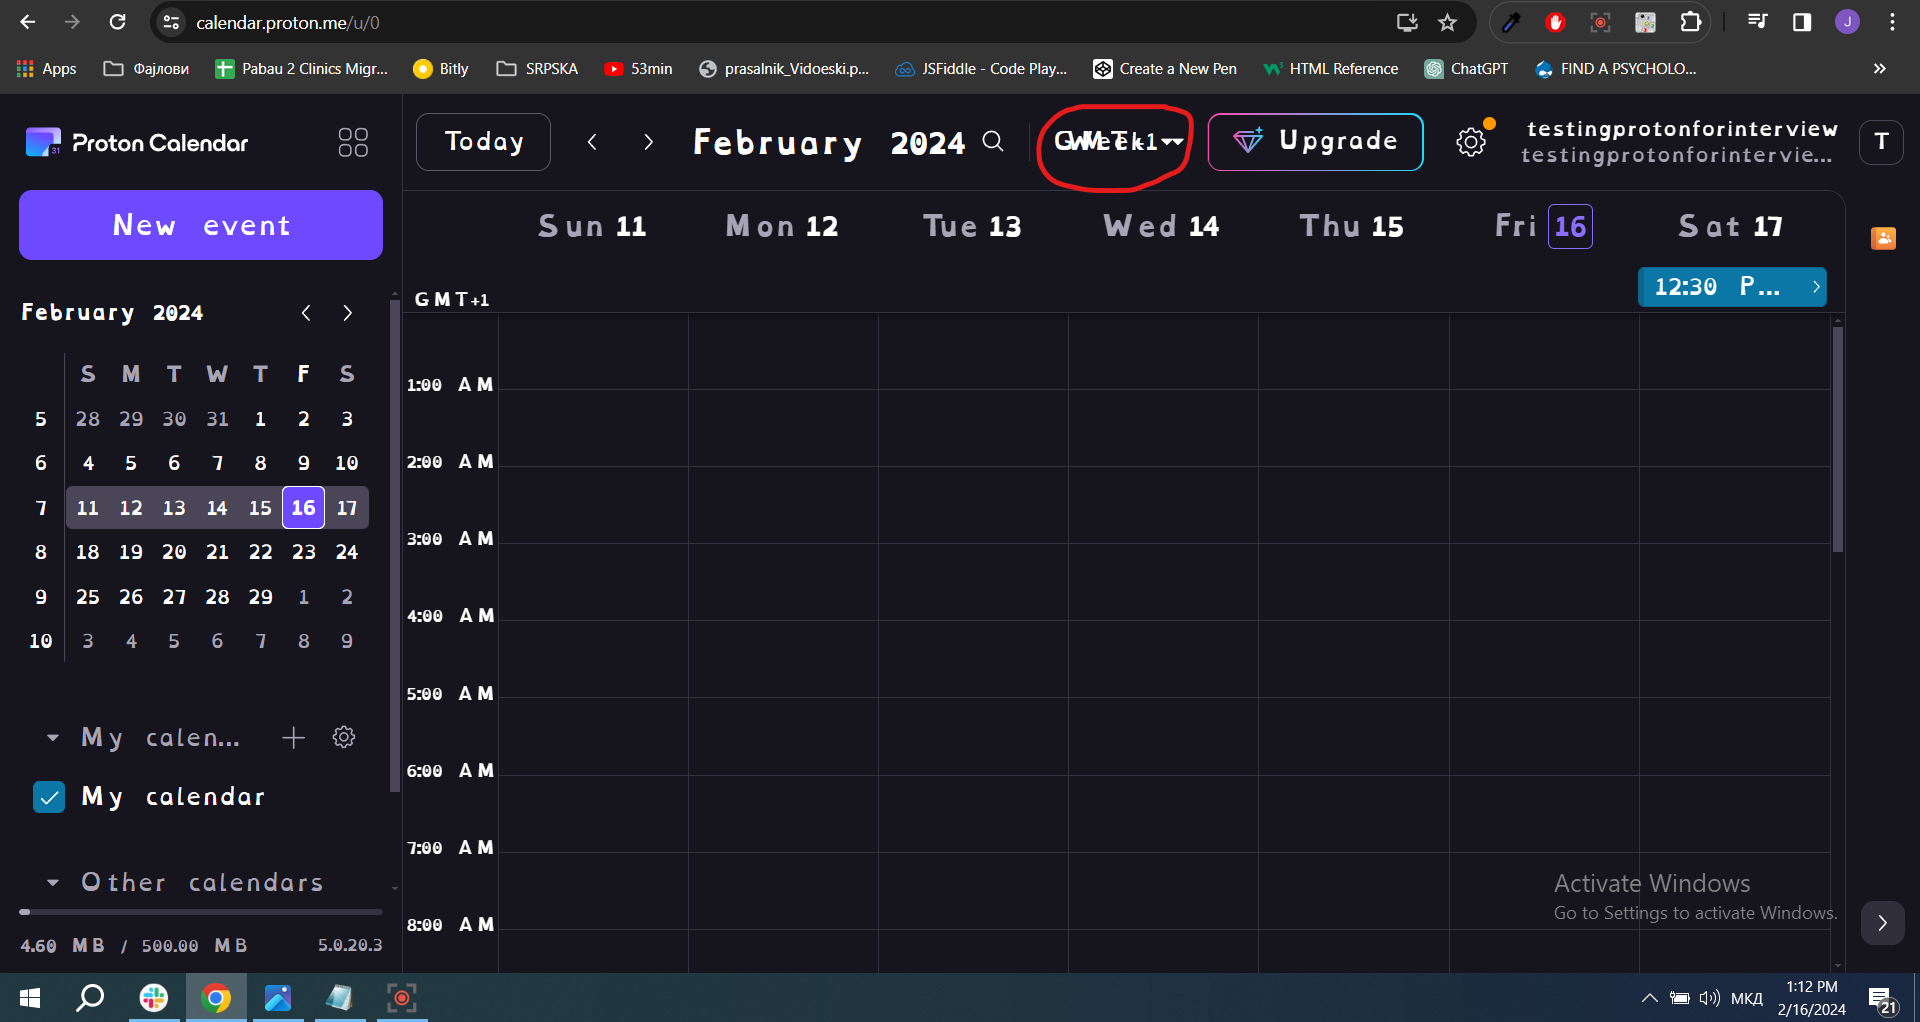 Proton Calendar max size dyslexic font bug for day,week,month filder.png